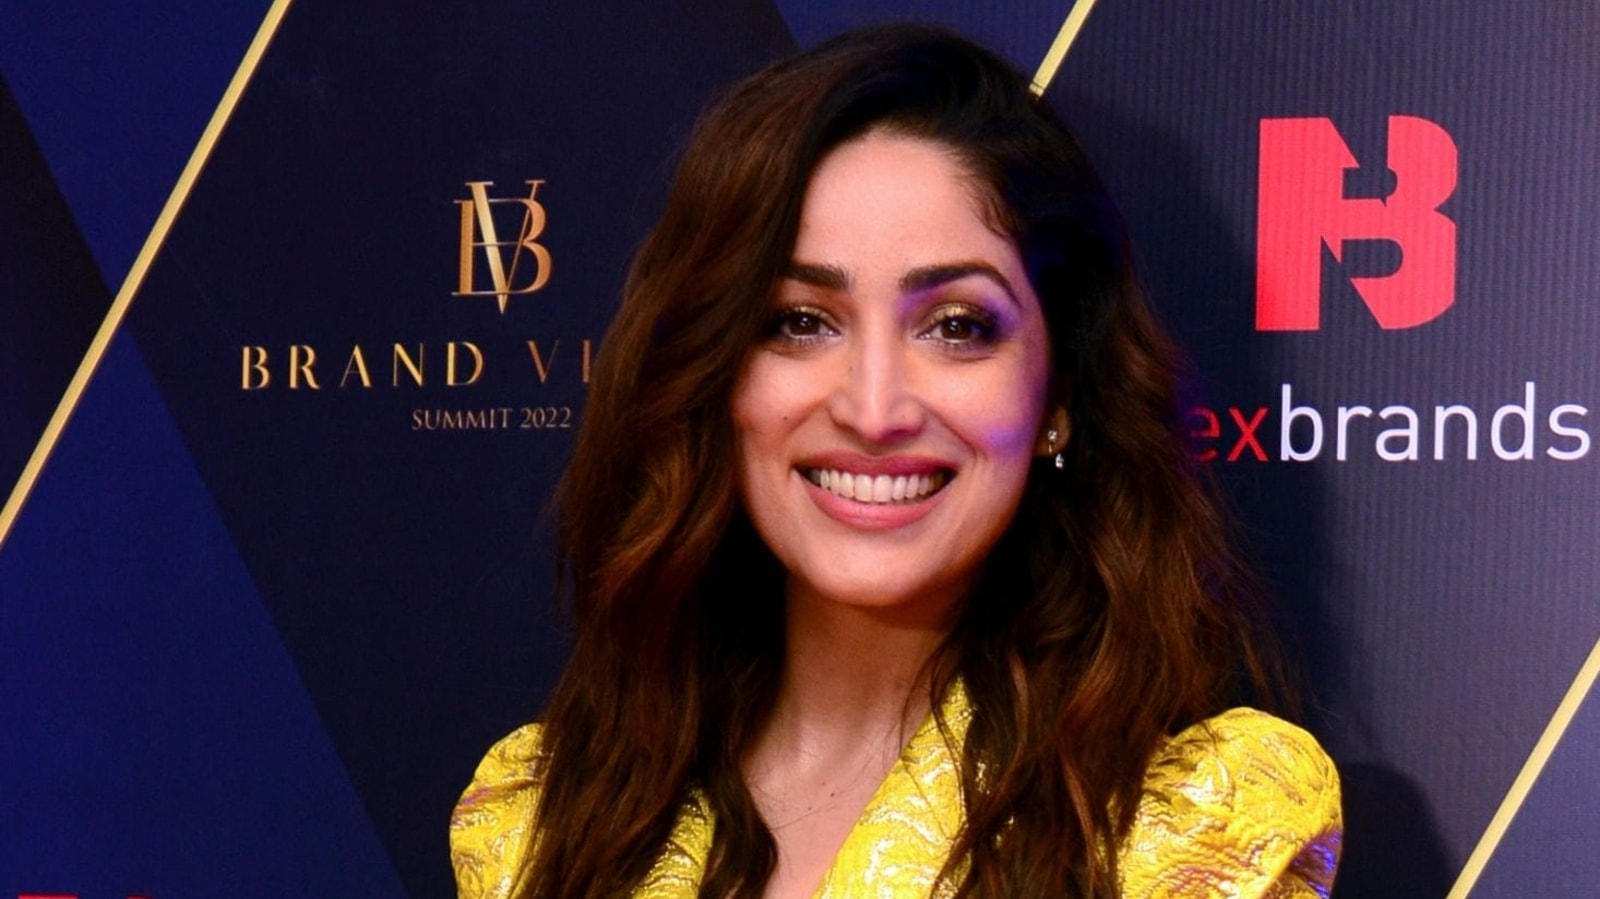 yami-gautam-feels-change-is-happening-as-she-talks-about-nepotism-in-bollywood